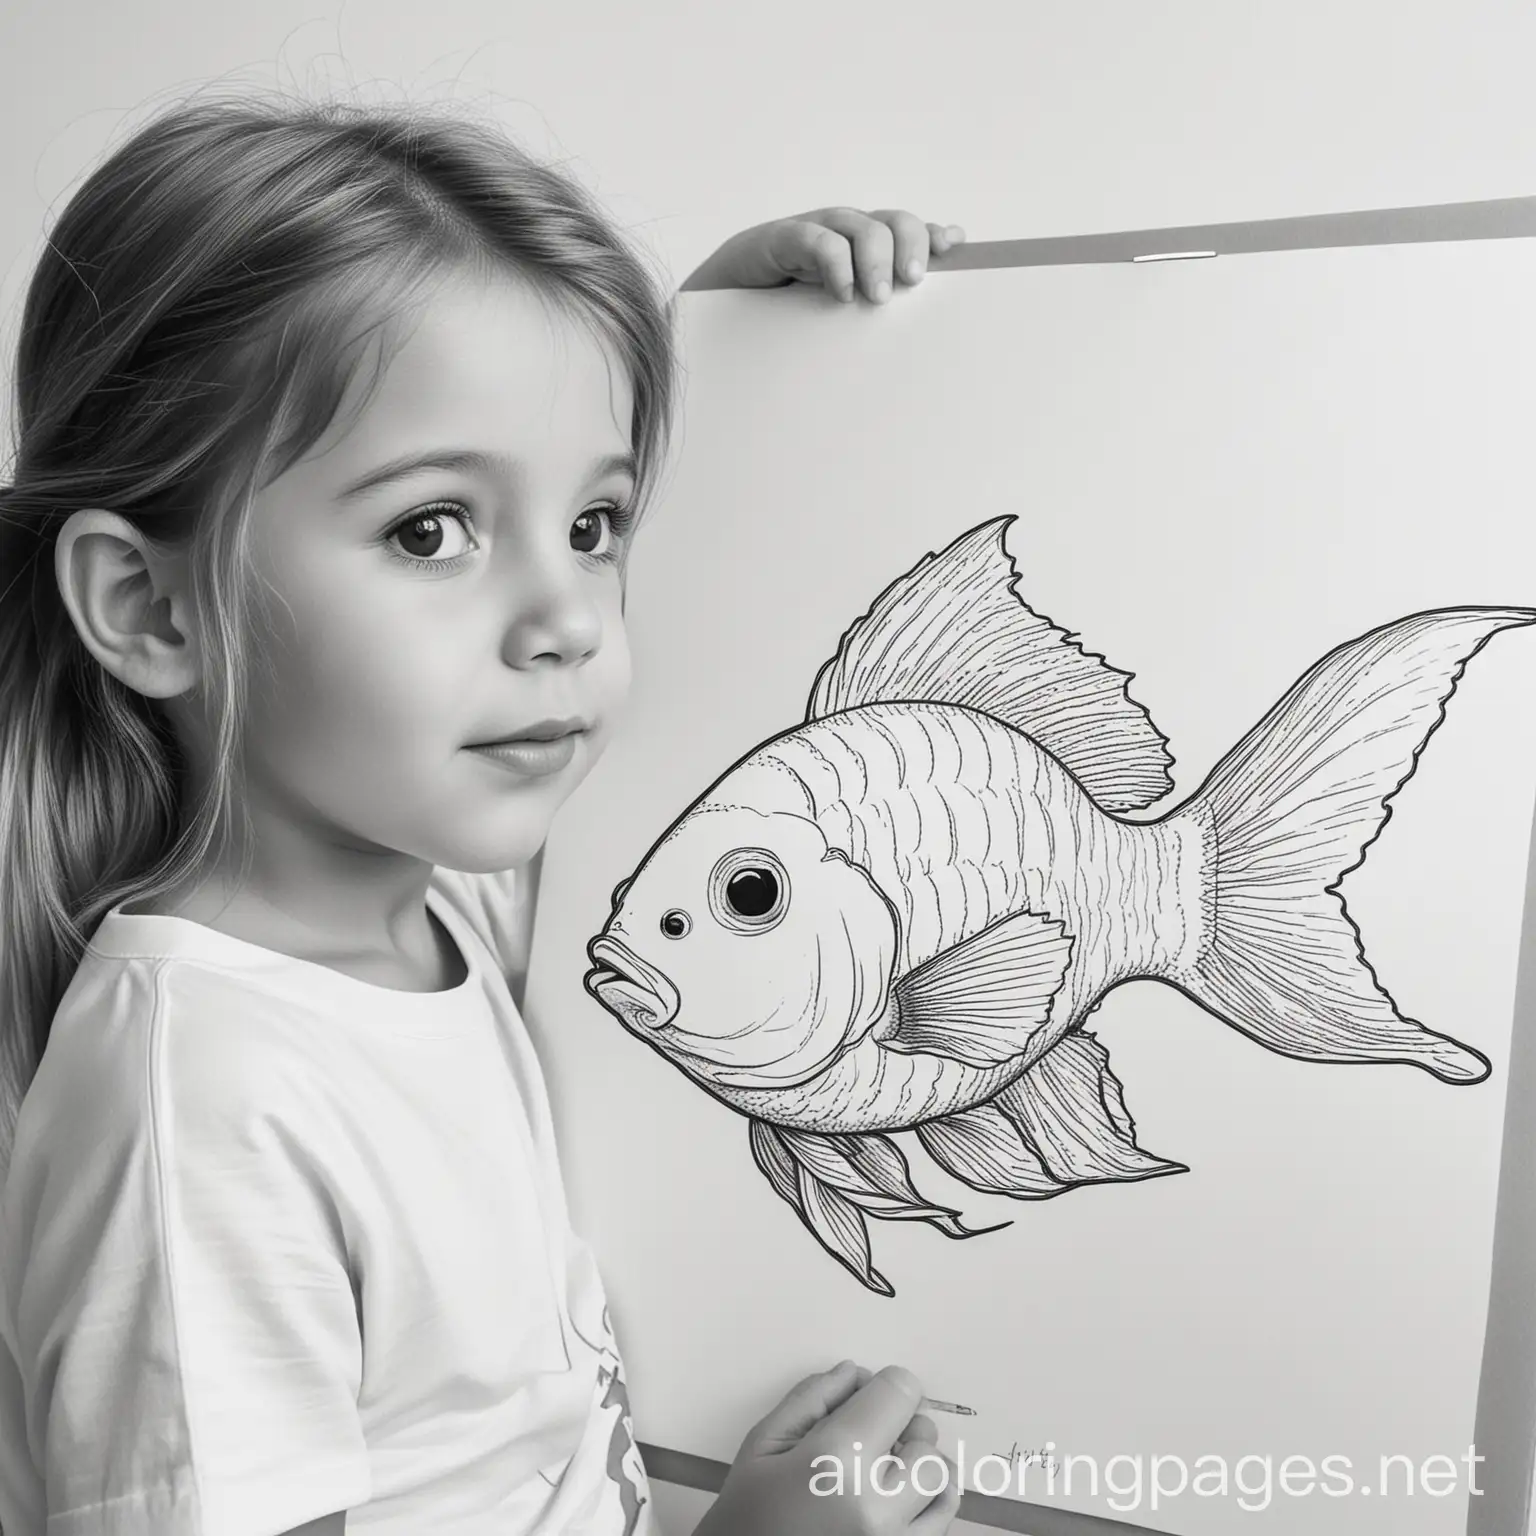 pet fish sitting on my shoulder, Coloring Page, black and white, line art, white background, Simplicity, Ample White Space. The background of the coloring page is plain white to make it easy for young children to color within the lines. The outlines of all the subjects are easy to distinguish, making it simple for kids to color without too much difficulty